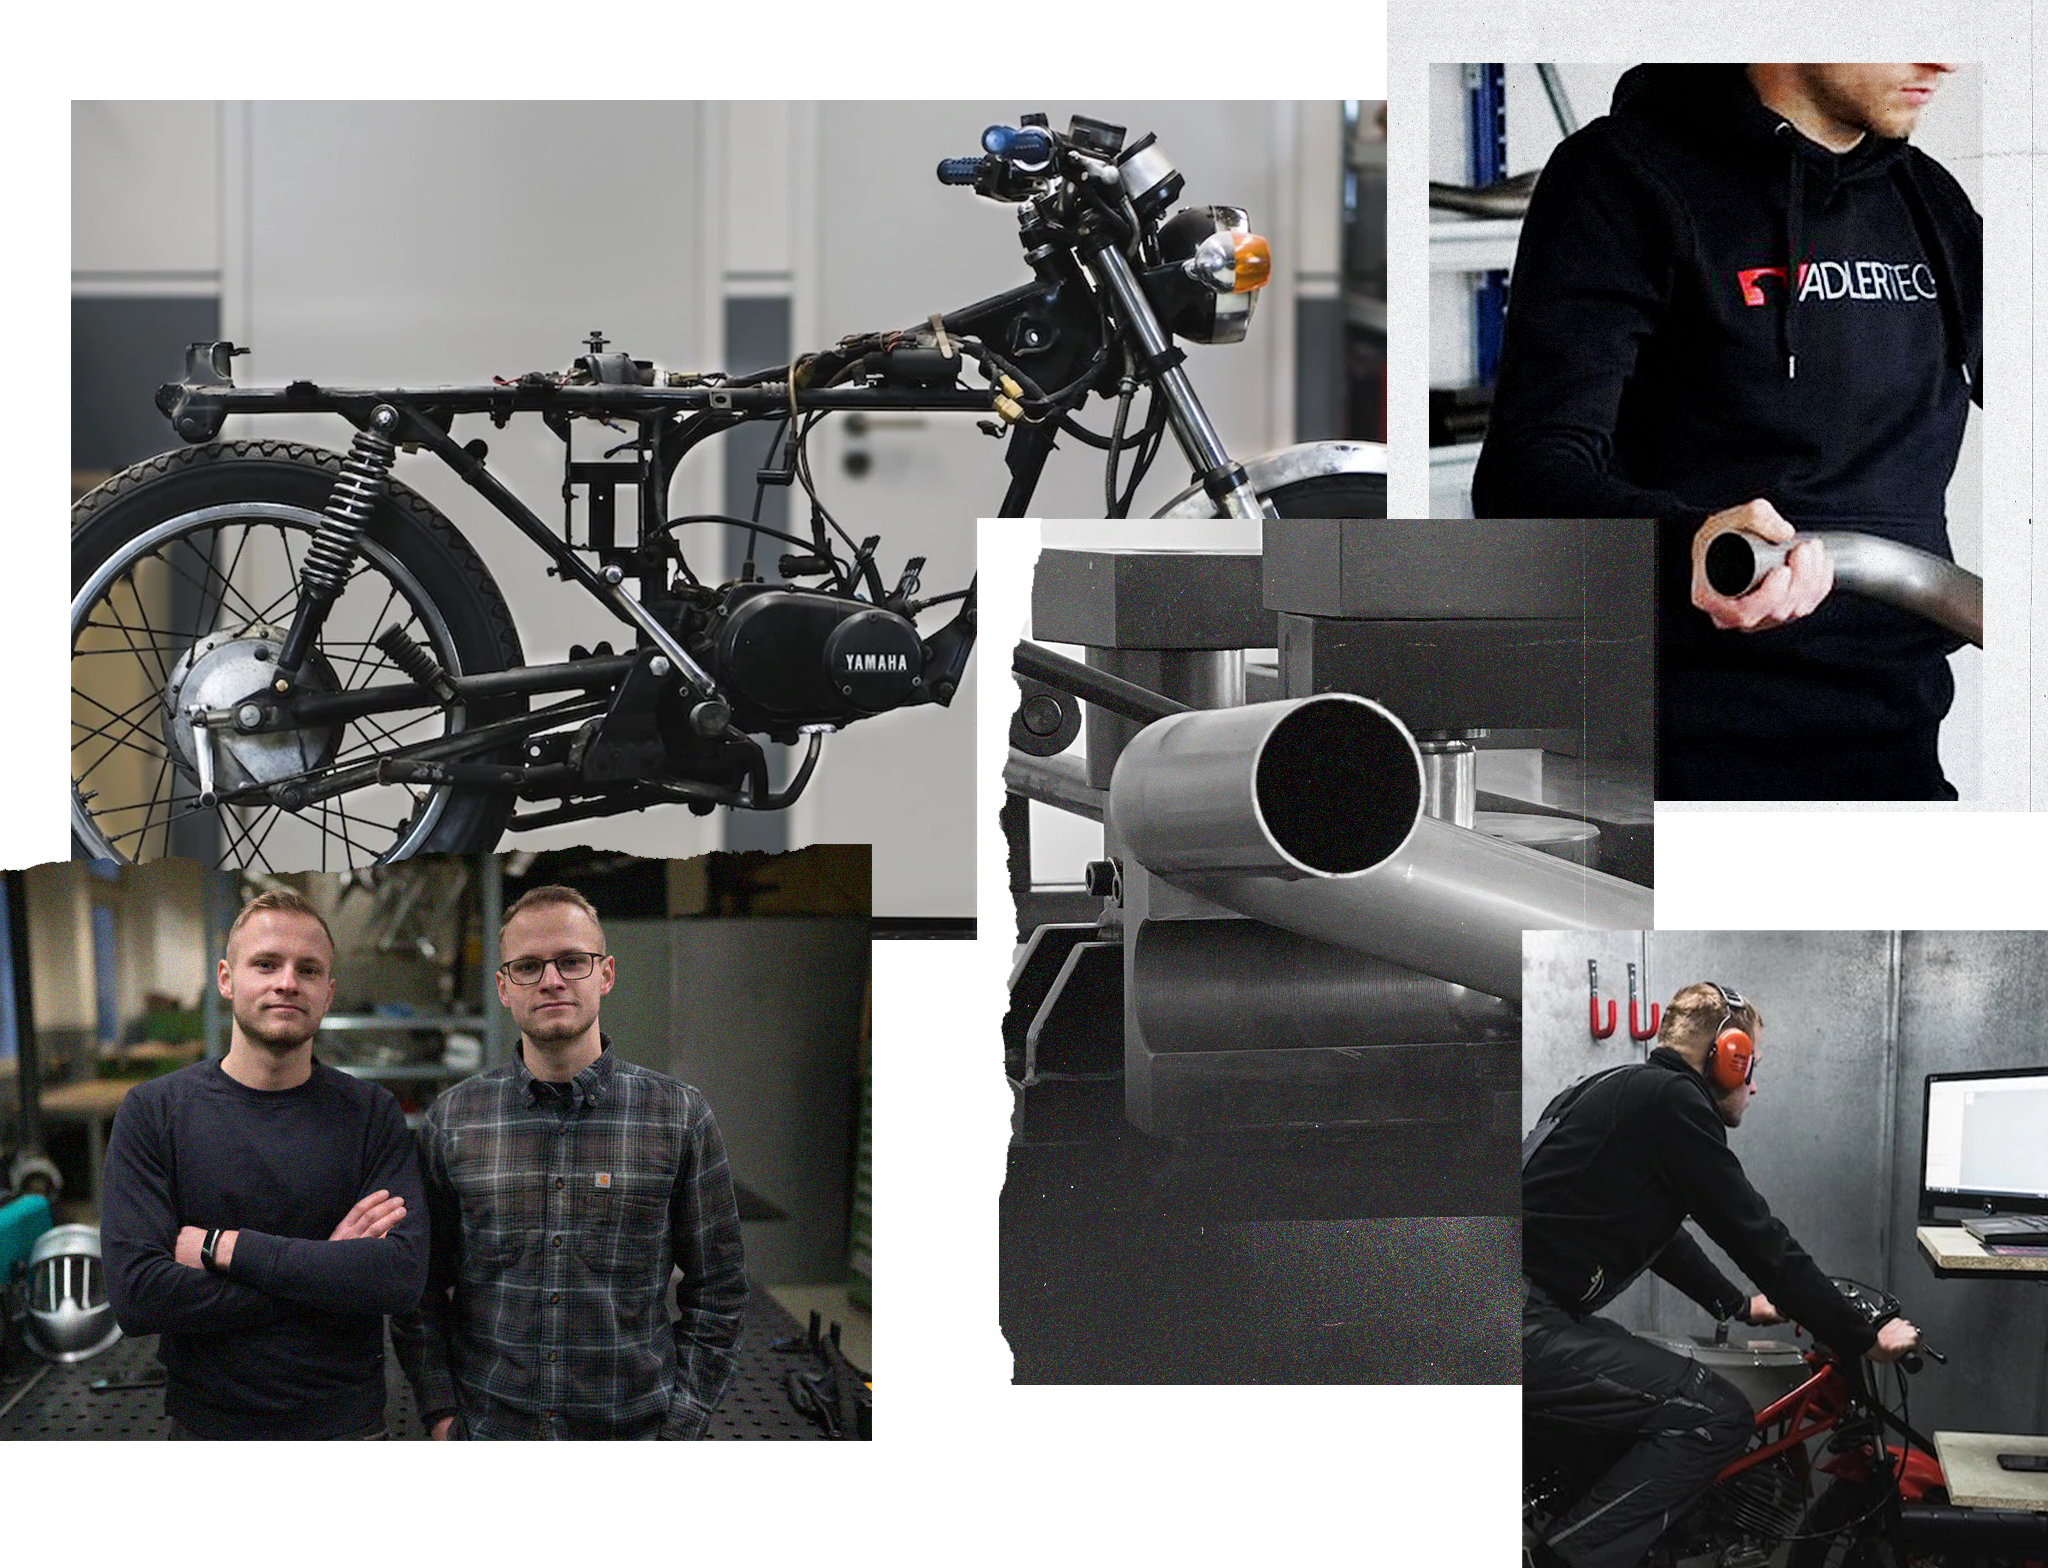 Adler brothers lead the German market with their exhaust systems for motorcycles.